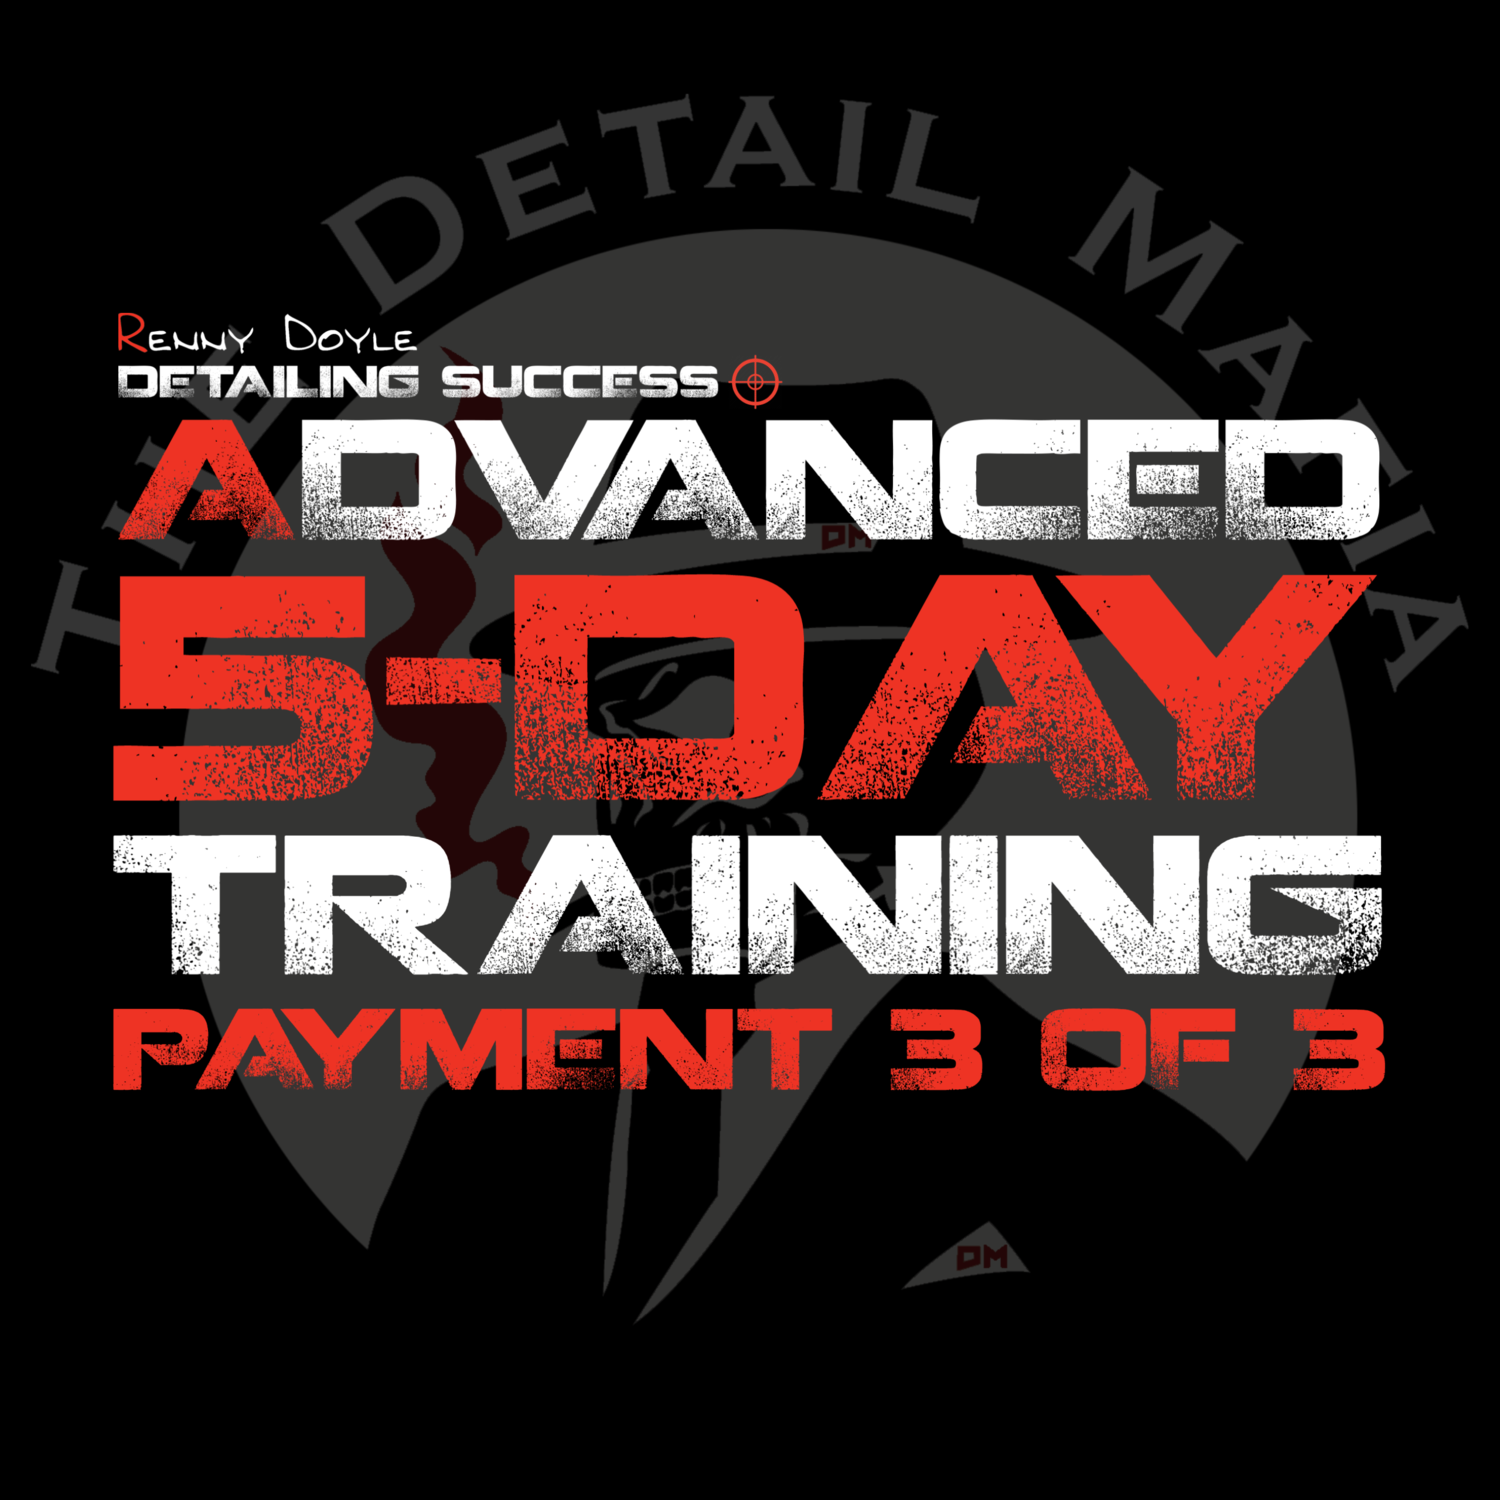 Advanced 5-Day Training 3rd Payment 2022/2023